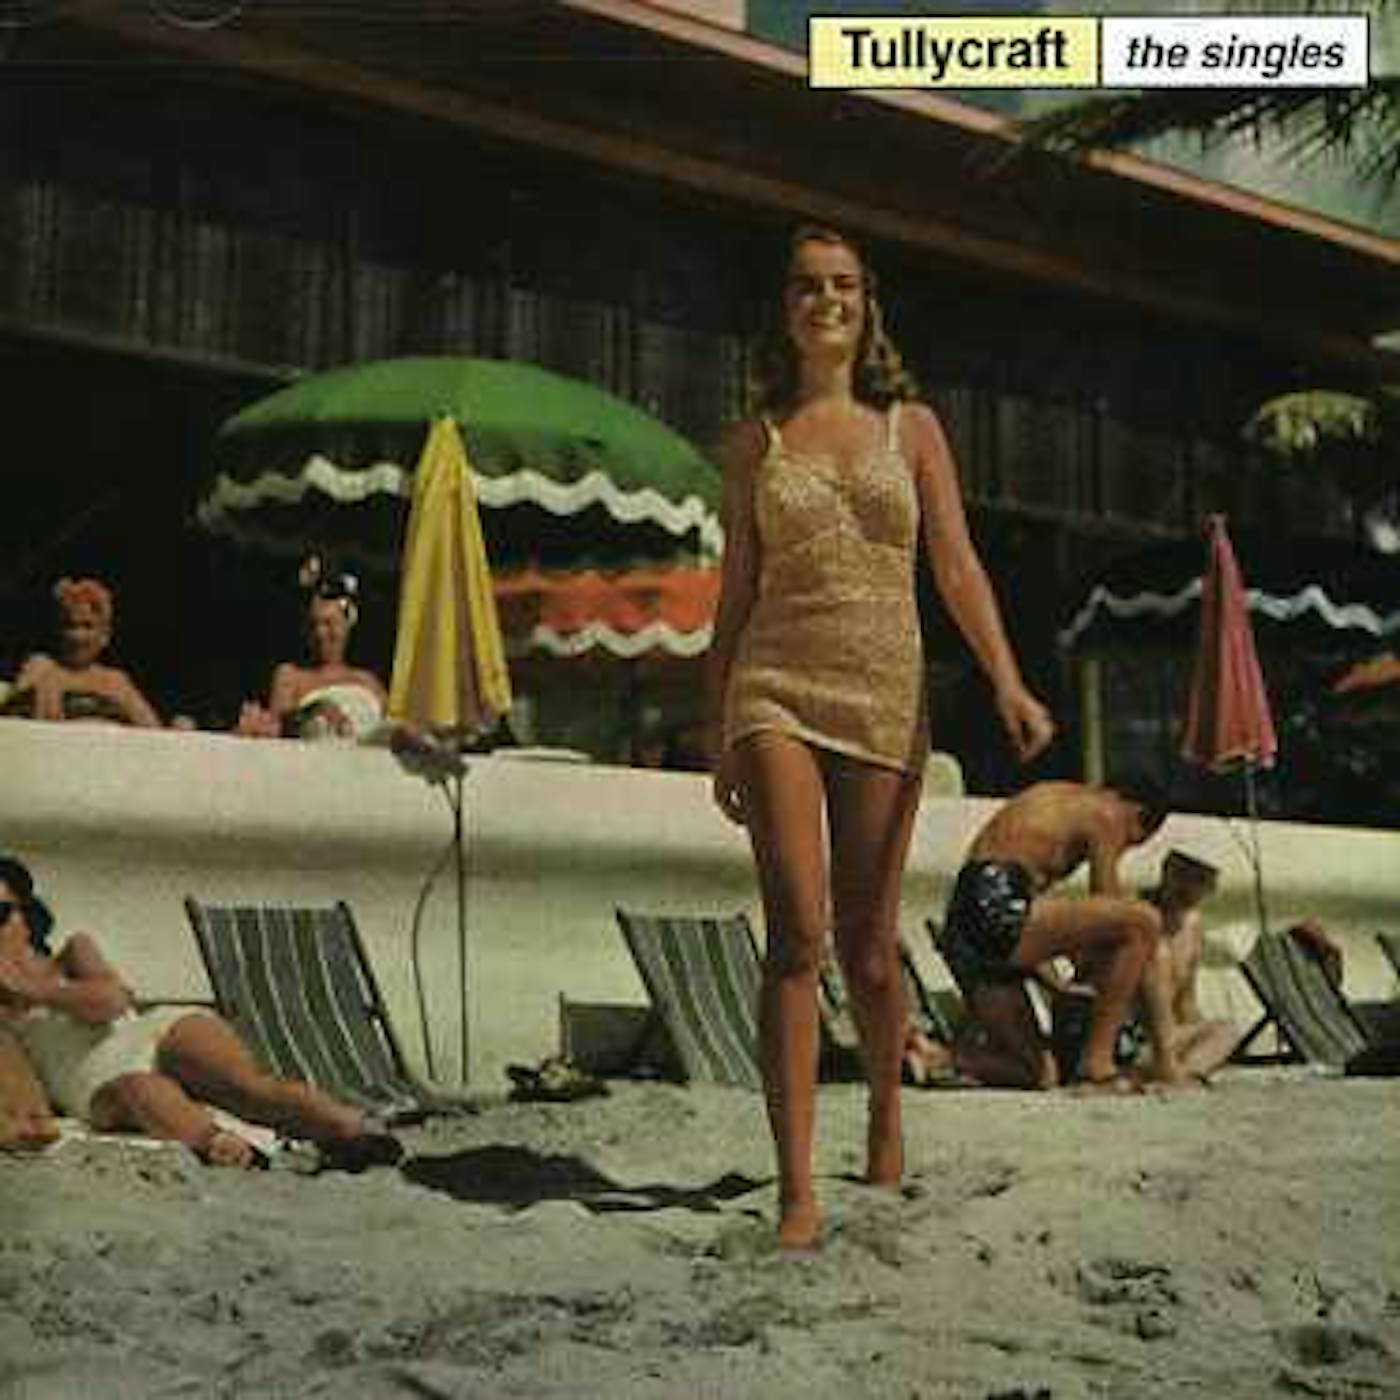 Tullycraft SINGLES COLLECTION CD